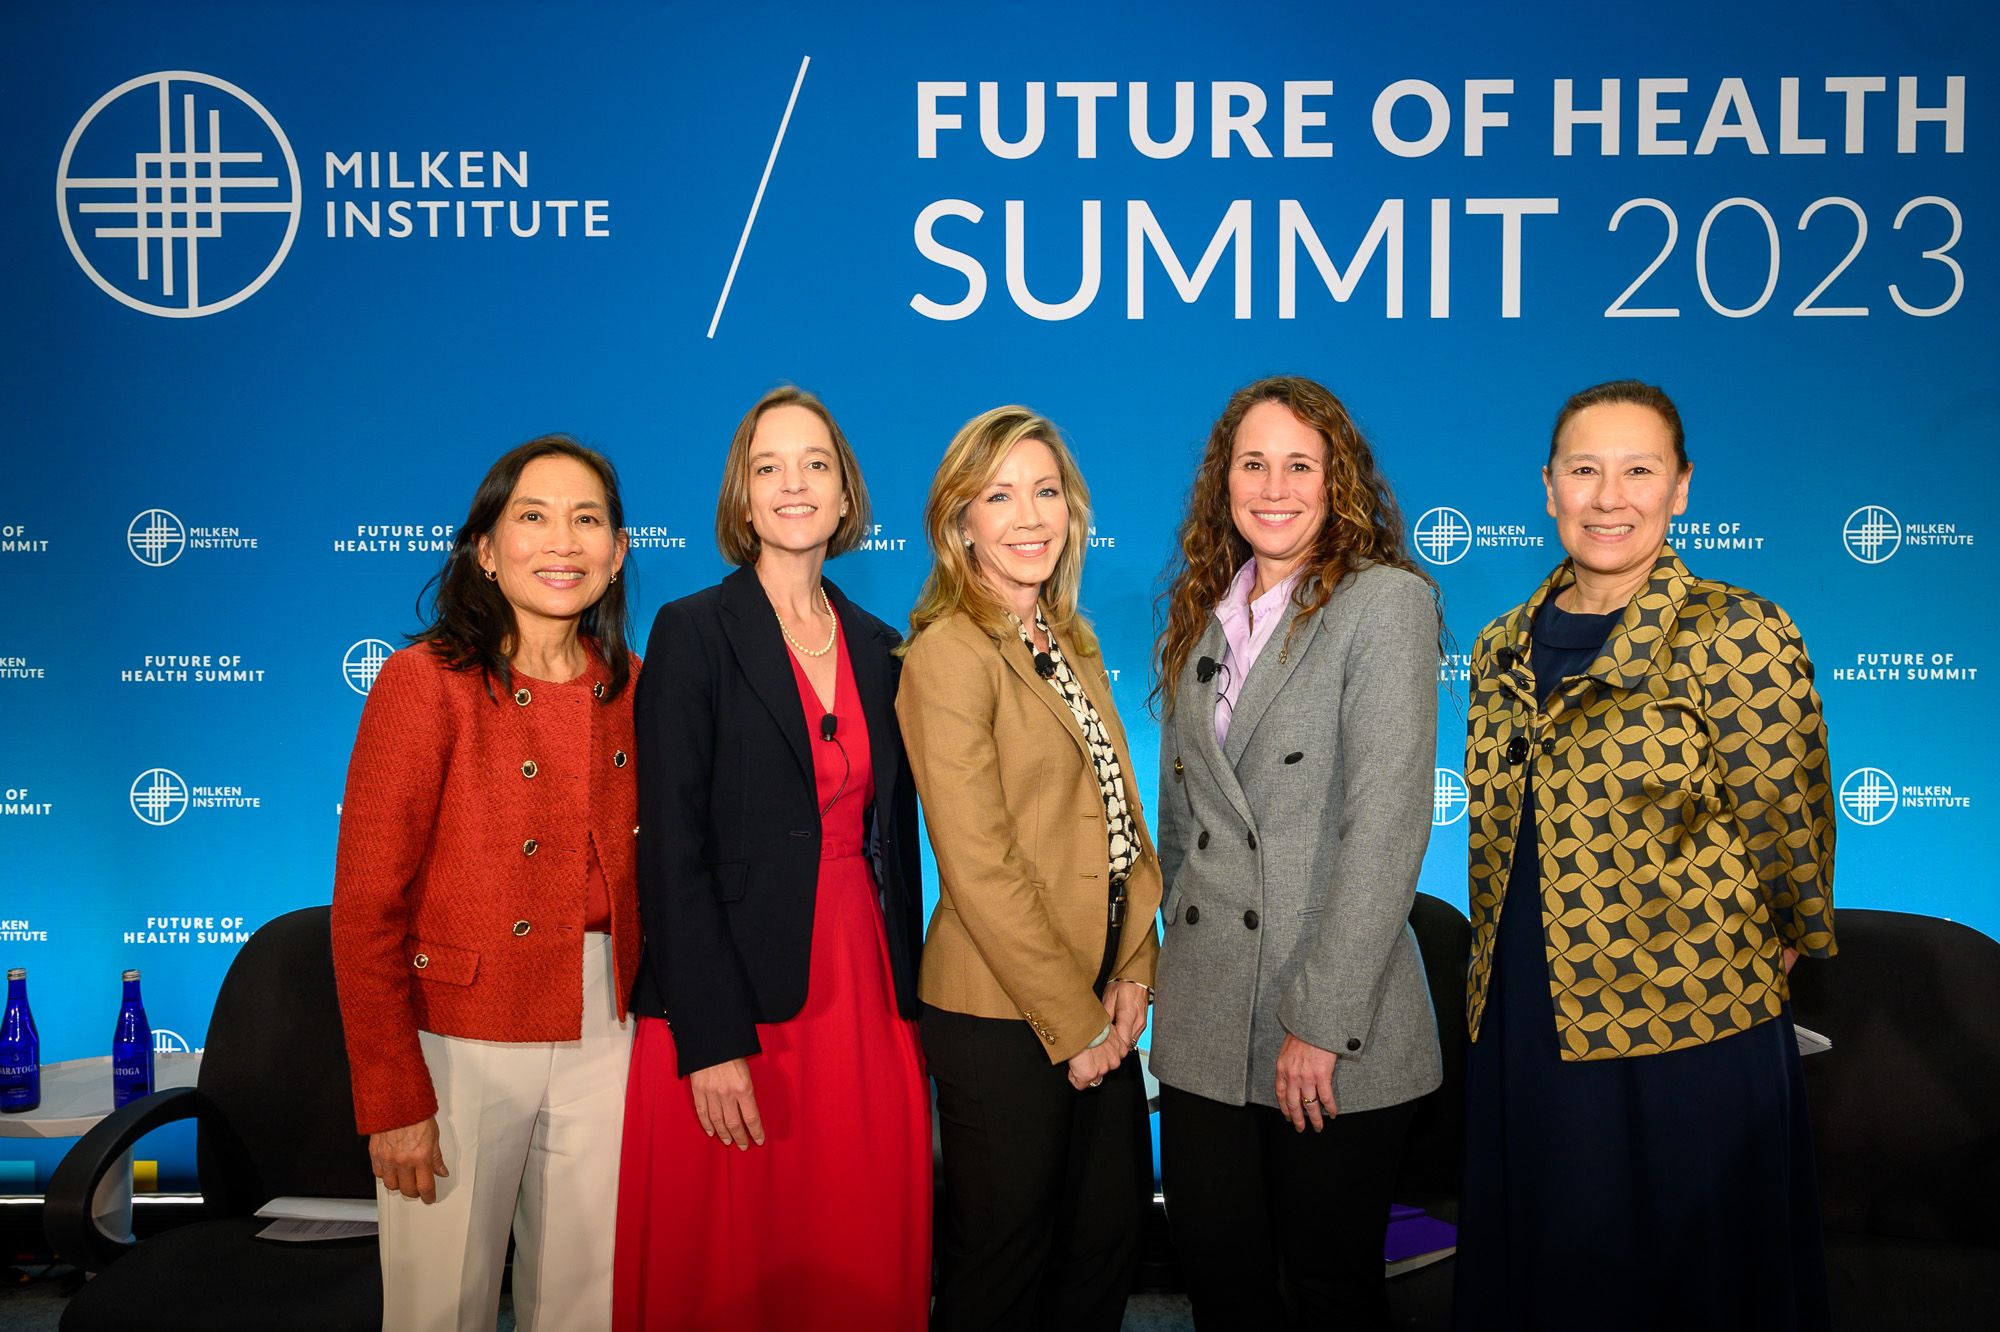 Diane Ty, Milken Institute; Amy Kelley, National Institutes of Health; Helen Lamont, US Department of Health and Human Services; Joanne Pike, Alzheimer’s Association; and Elizabeth Fowler, Centers for Medicare and Medicaid Services